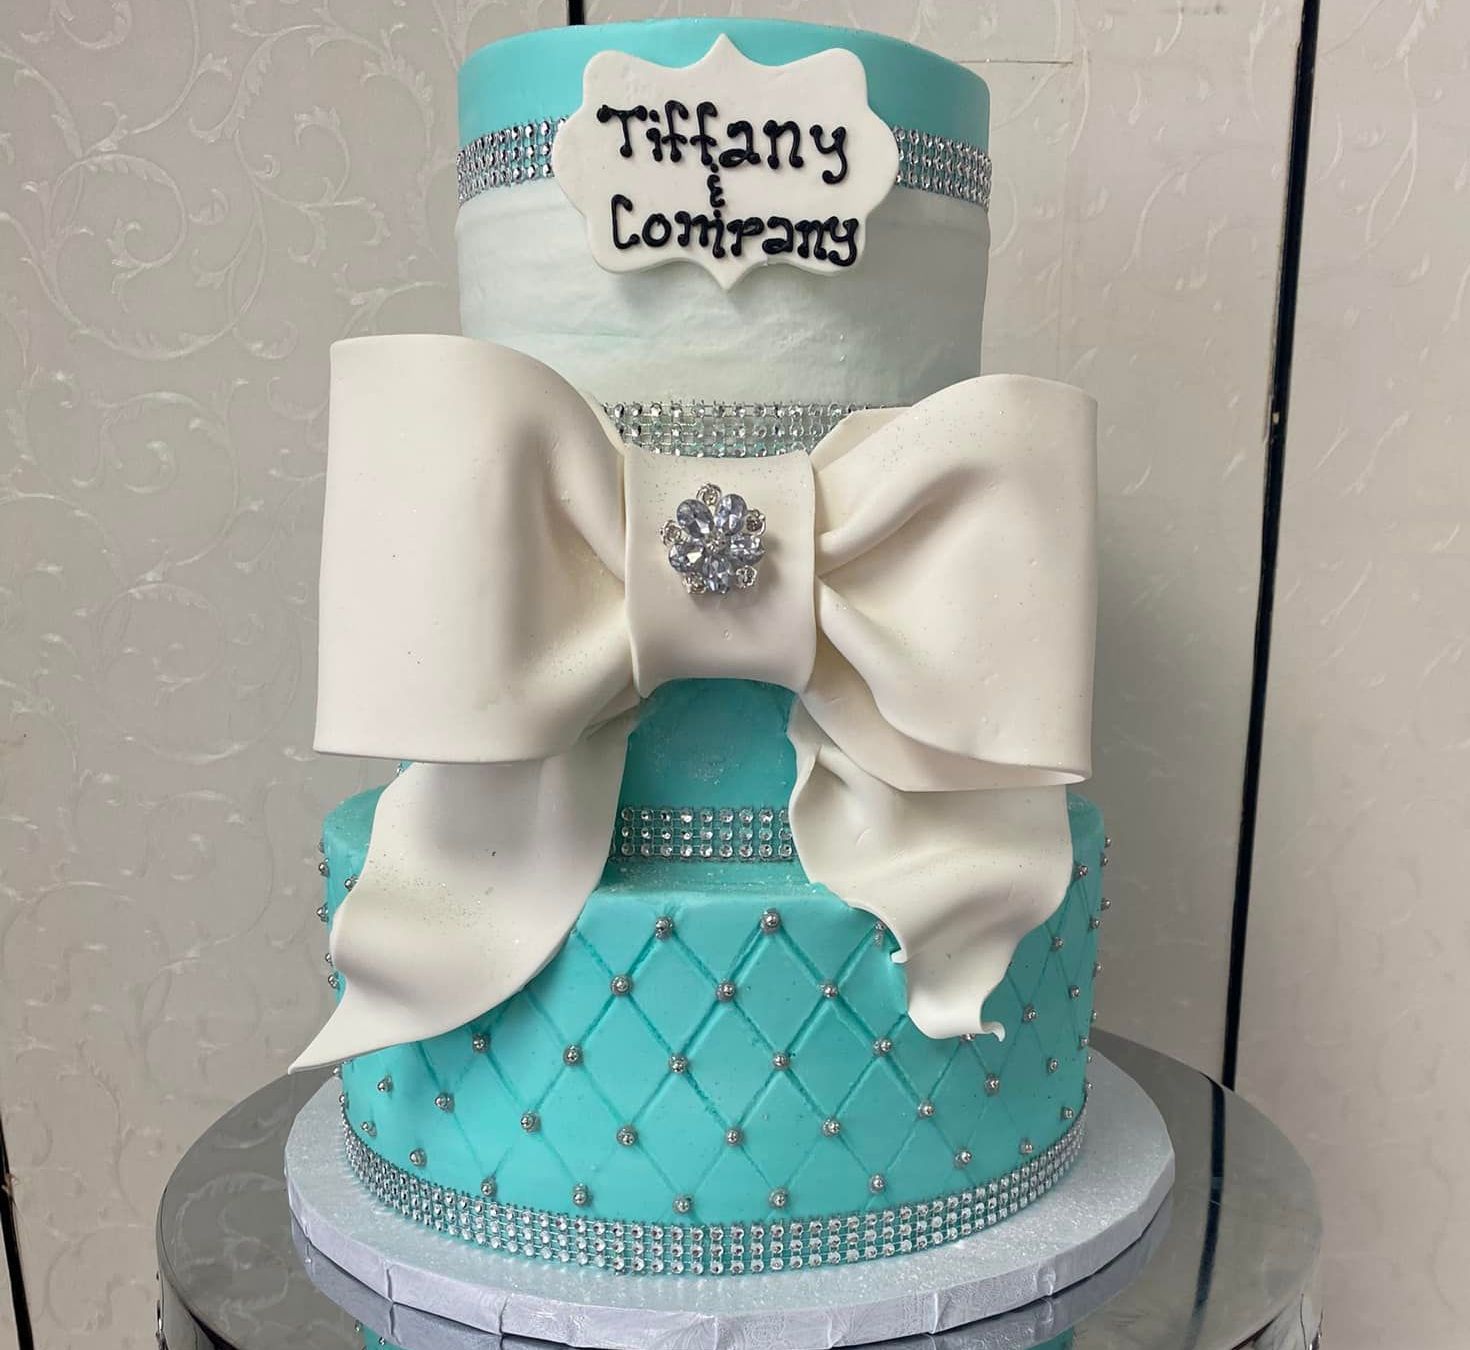 A beautiful Tiffany blue tiered cake with a huge fondant bow